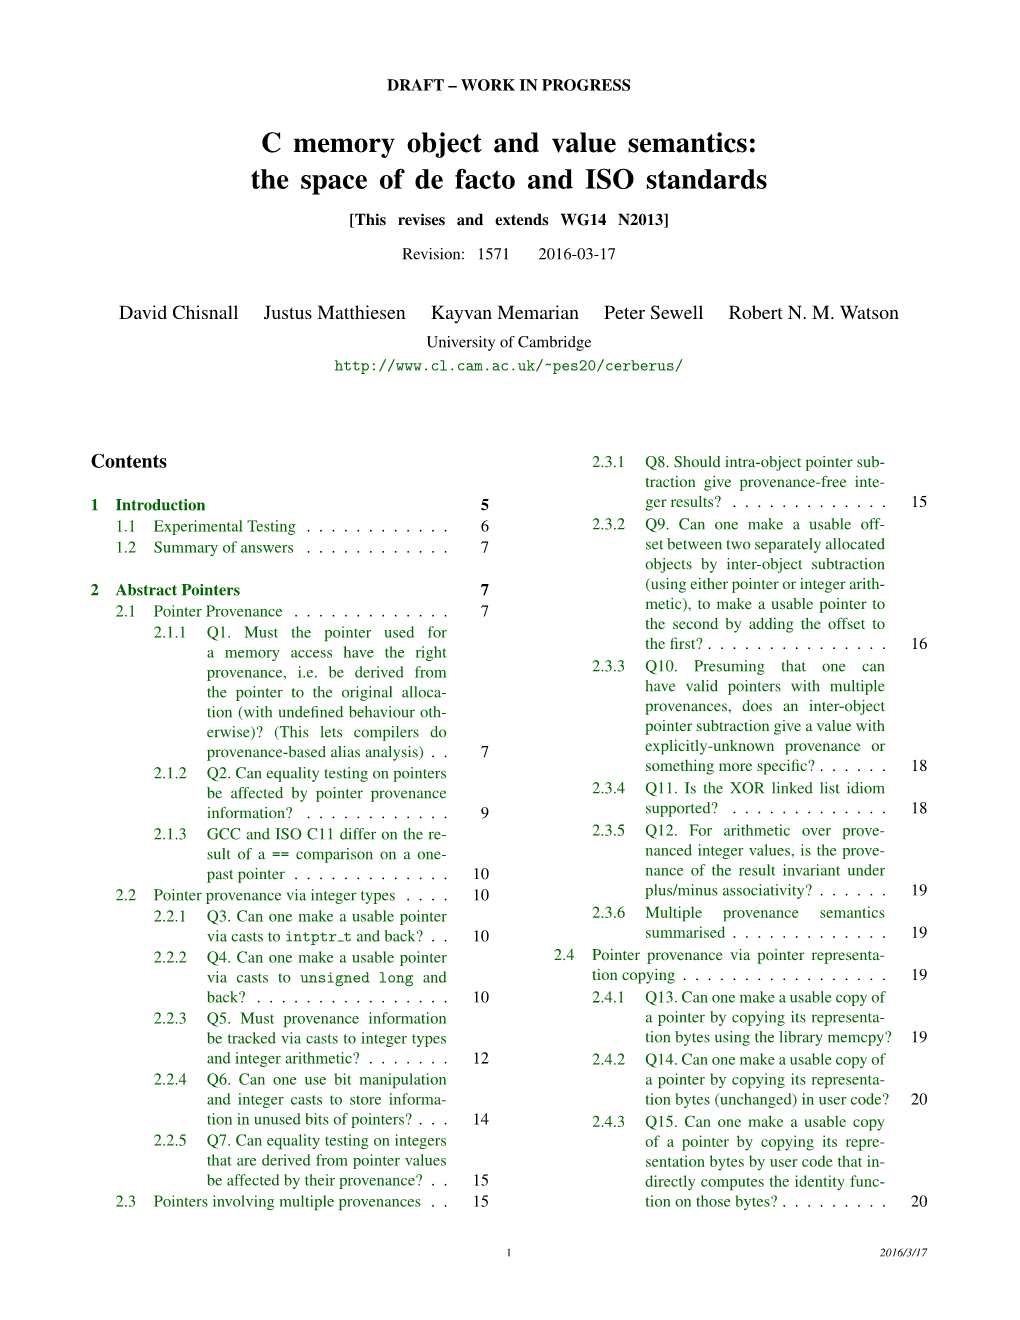 C Memory Object and Value Semantics: the Space of De Facto and ISO Standards